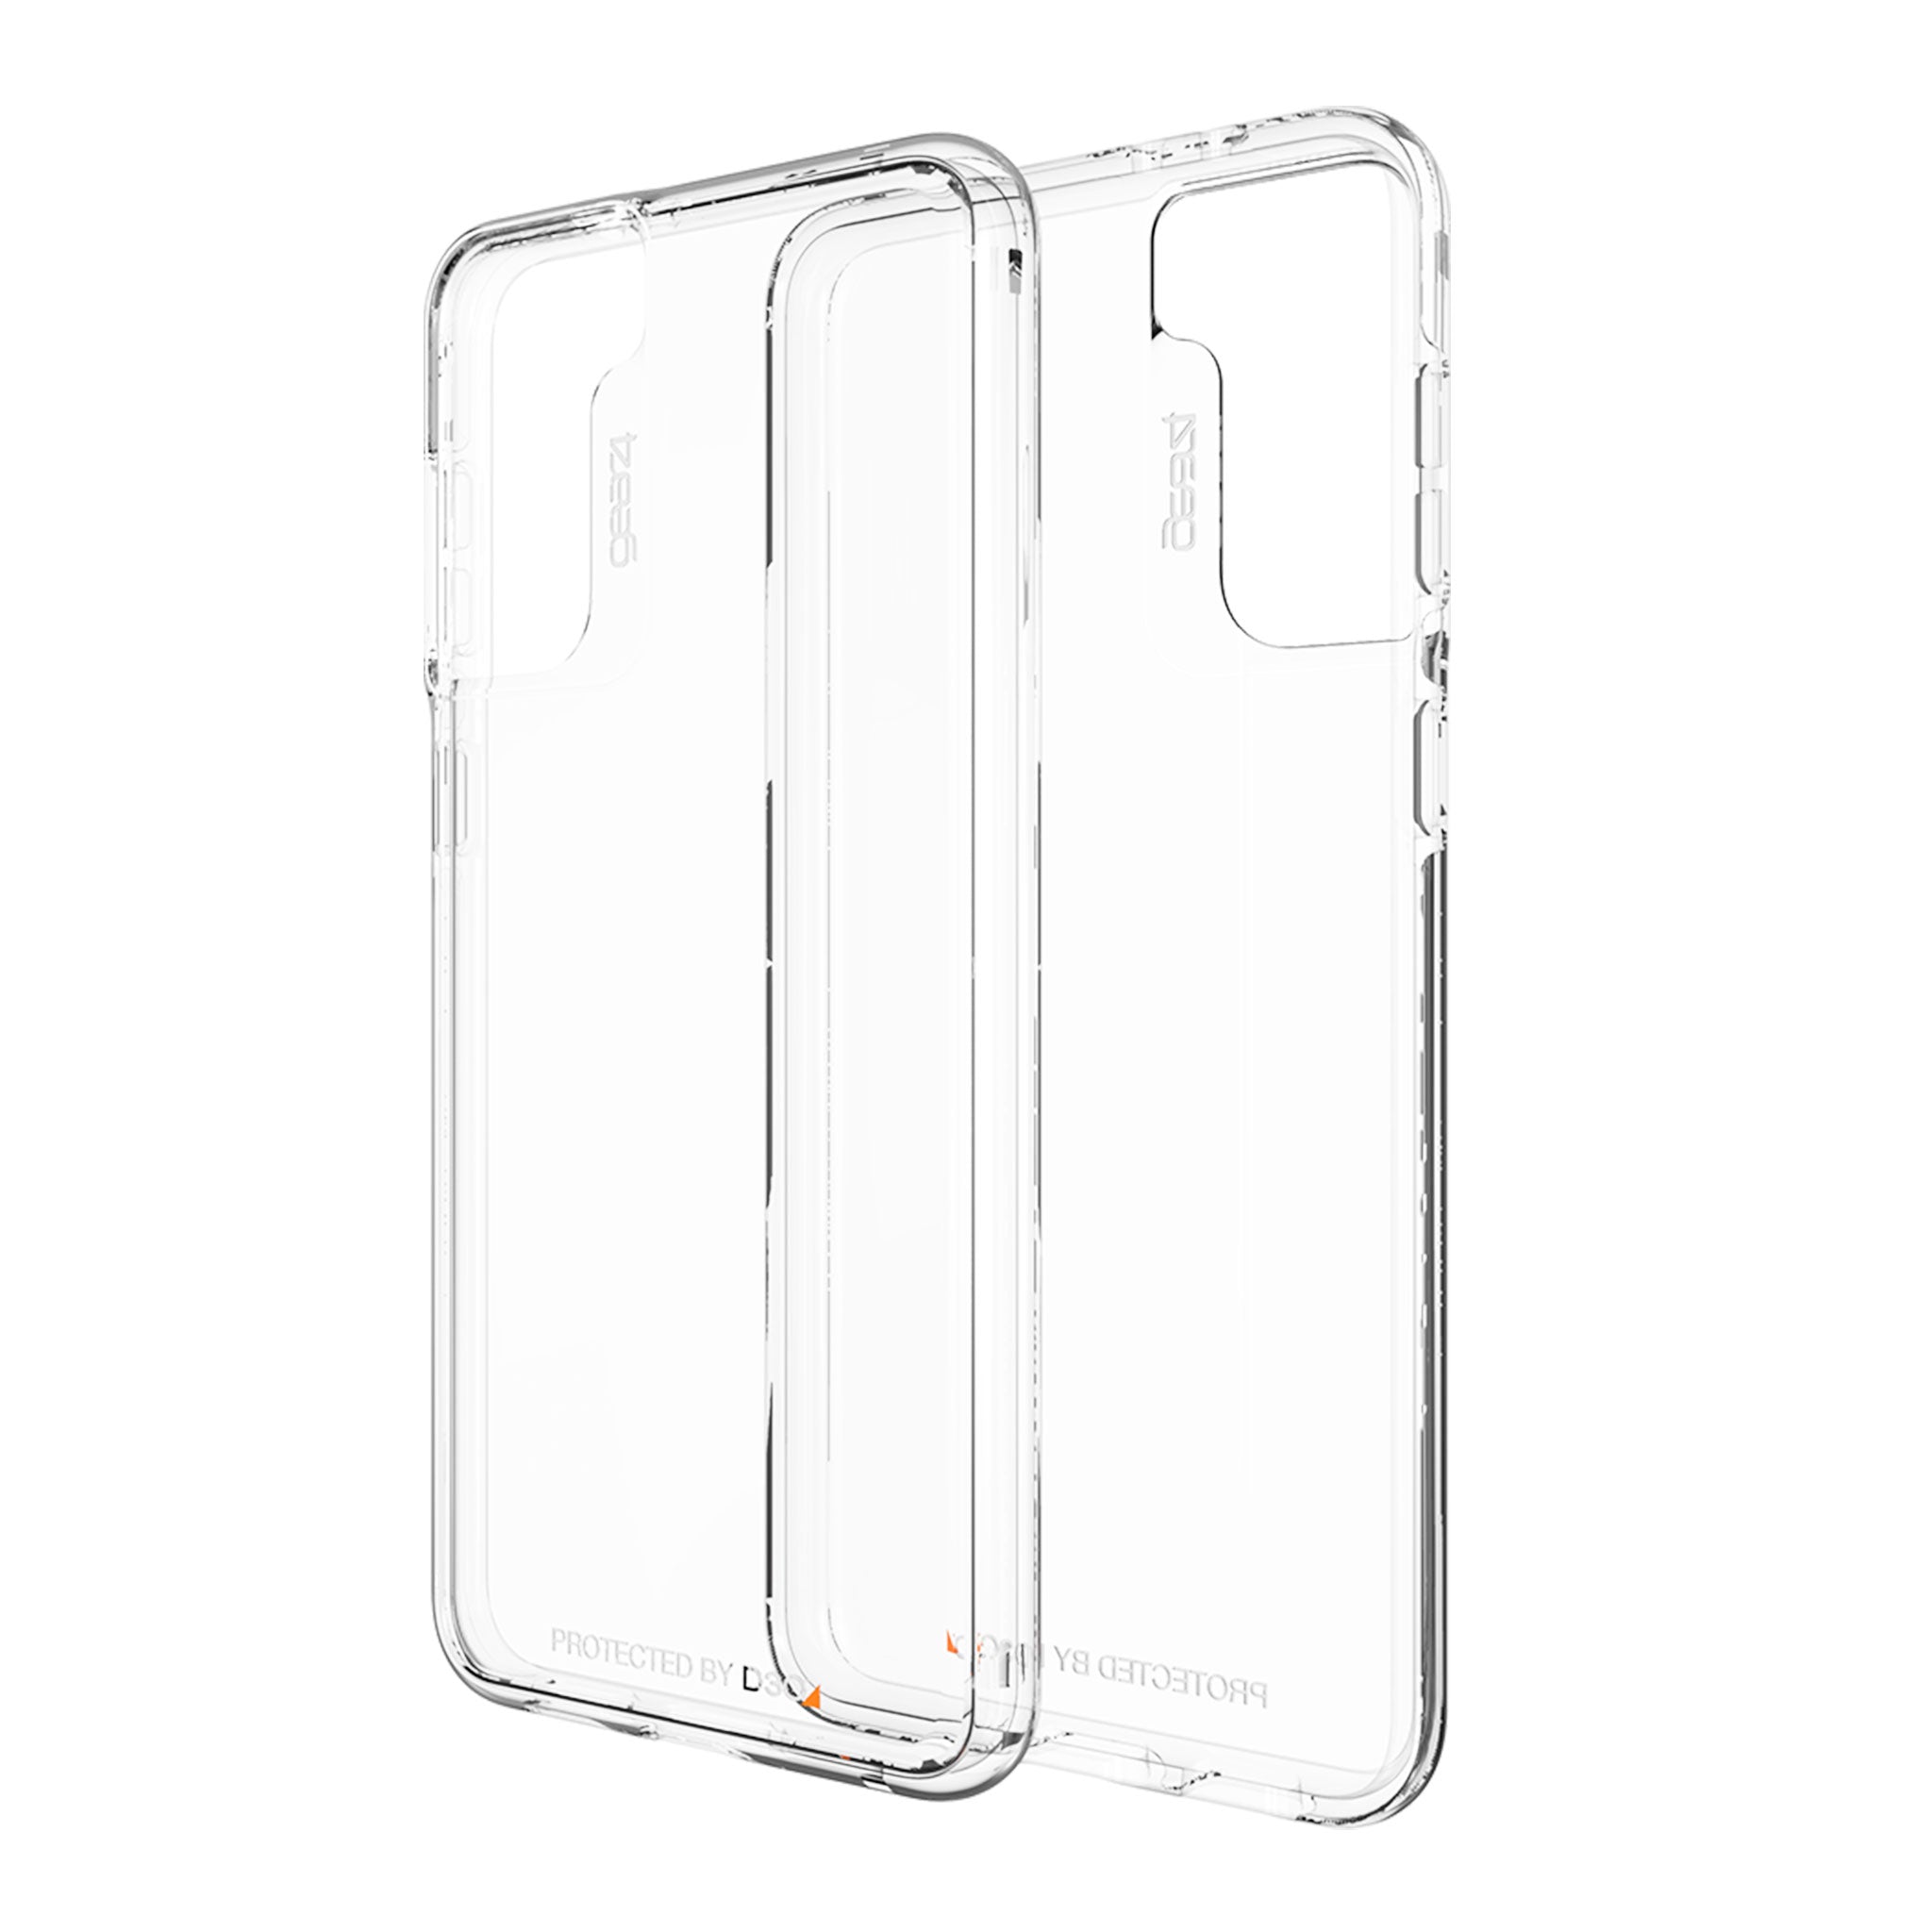 Gear4 - Crystal Palace Case For Samsung Galaxy S21 5g - Clear